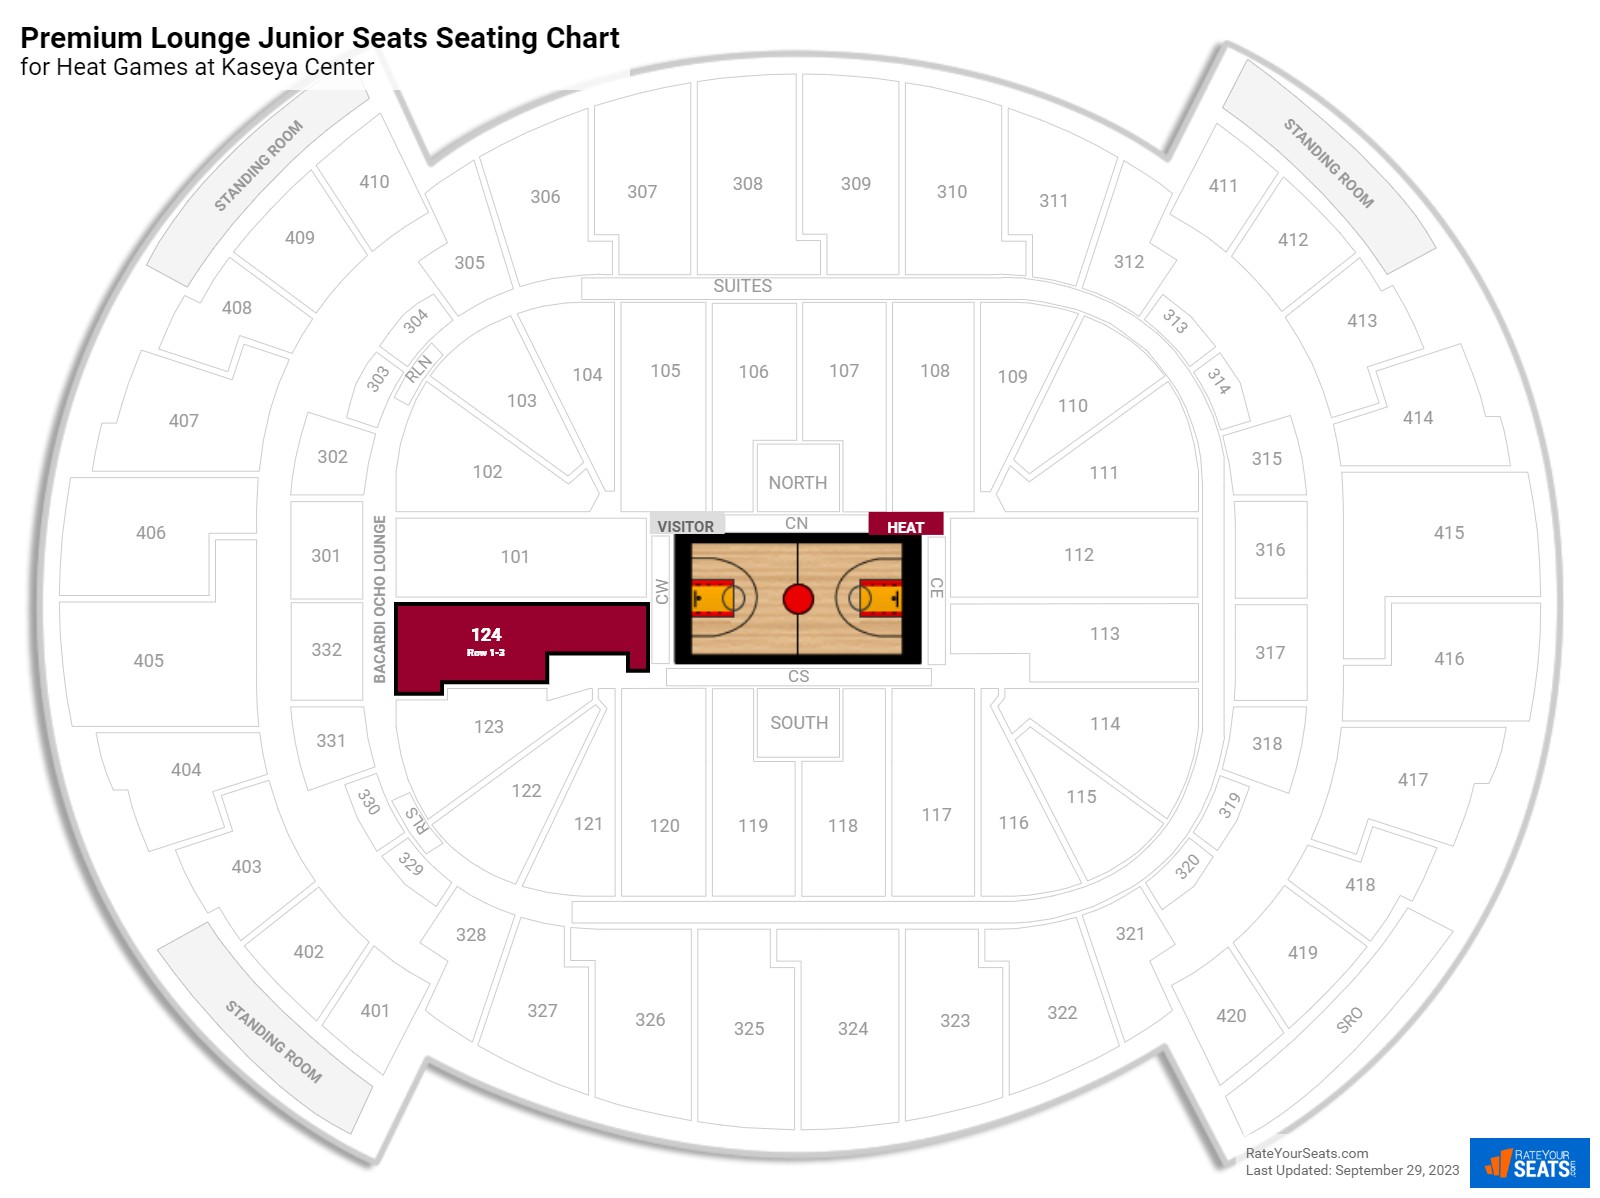 Heat AmericanAirlines Lounge Junior Seats Seating Chart at Miami-Dade Arena